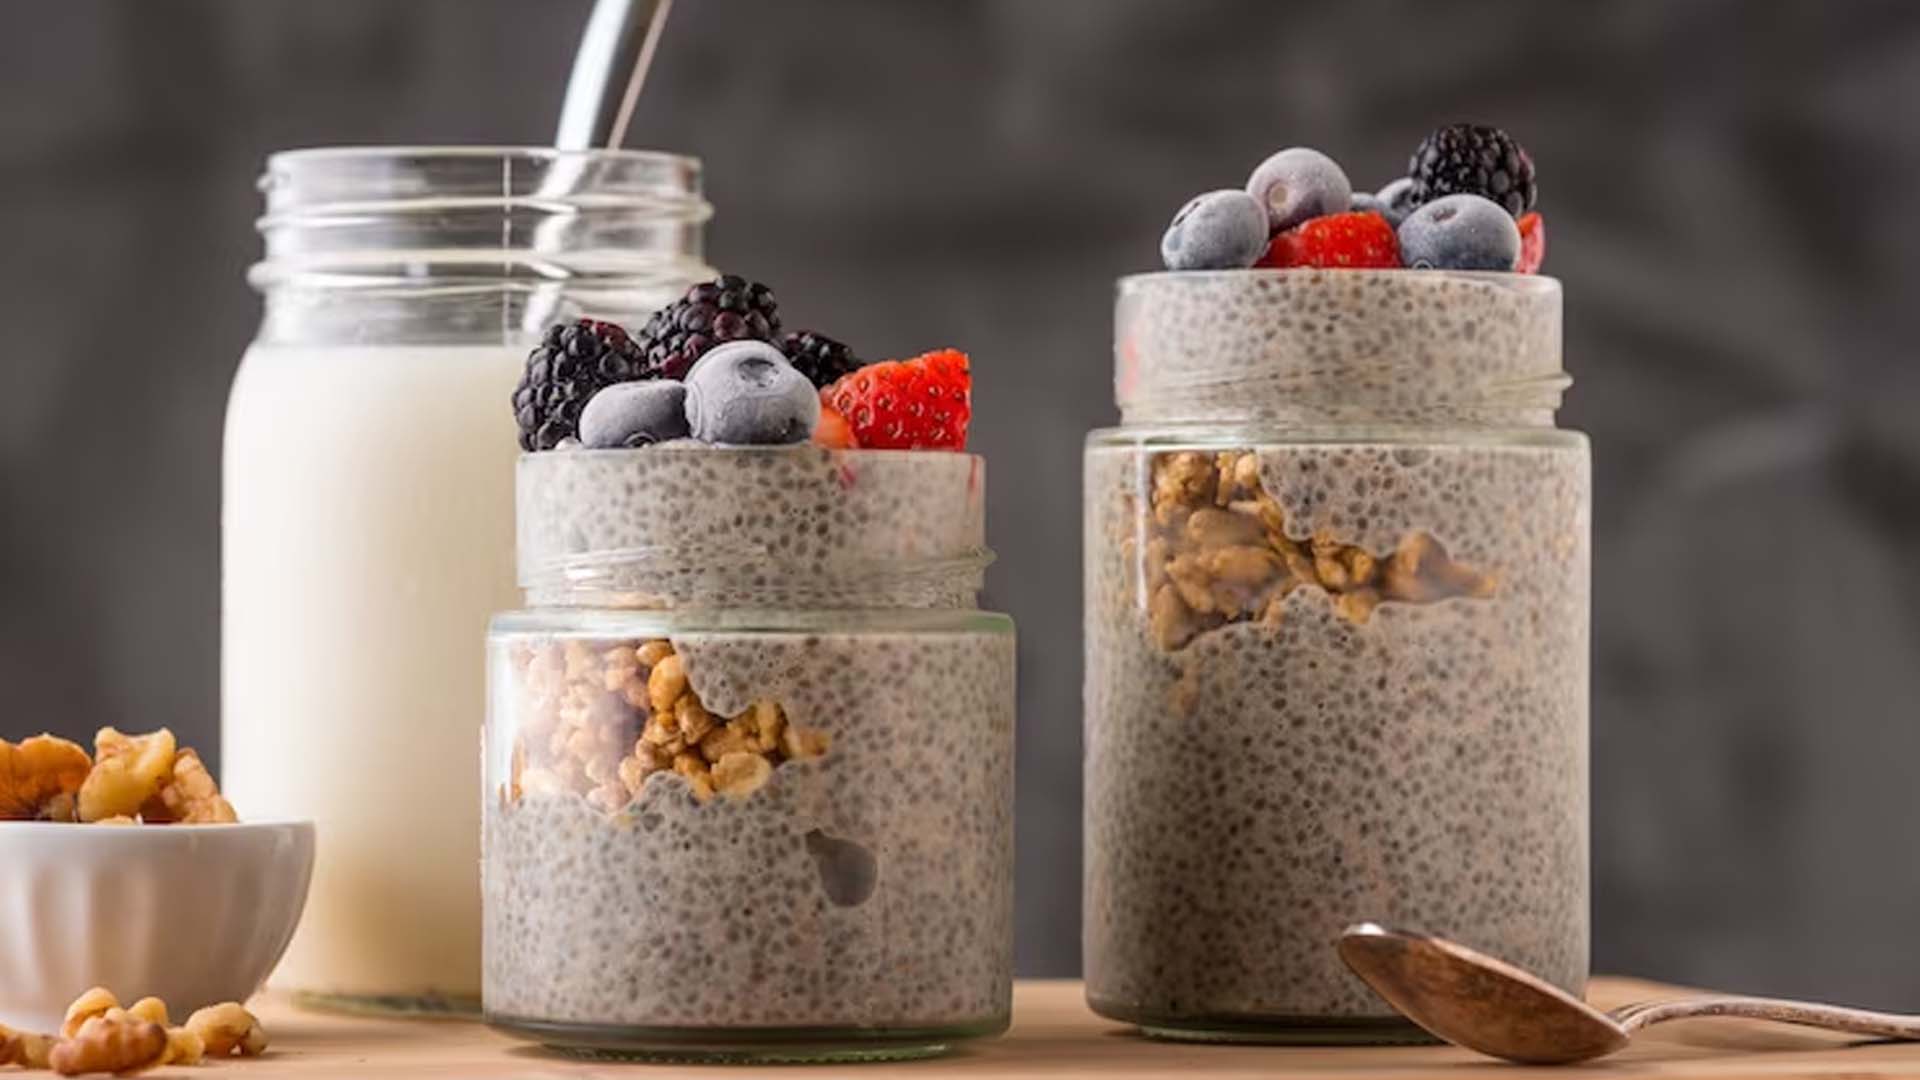 Chia seed pudding topped with berries and Walnuts